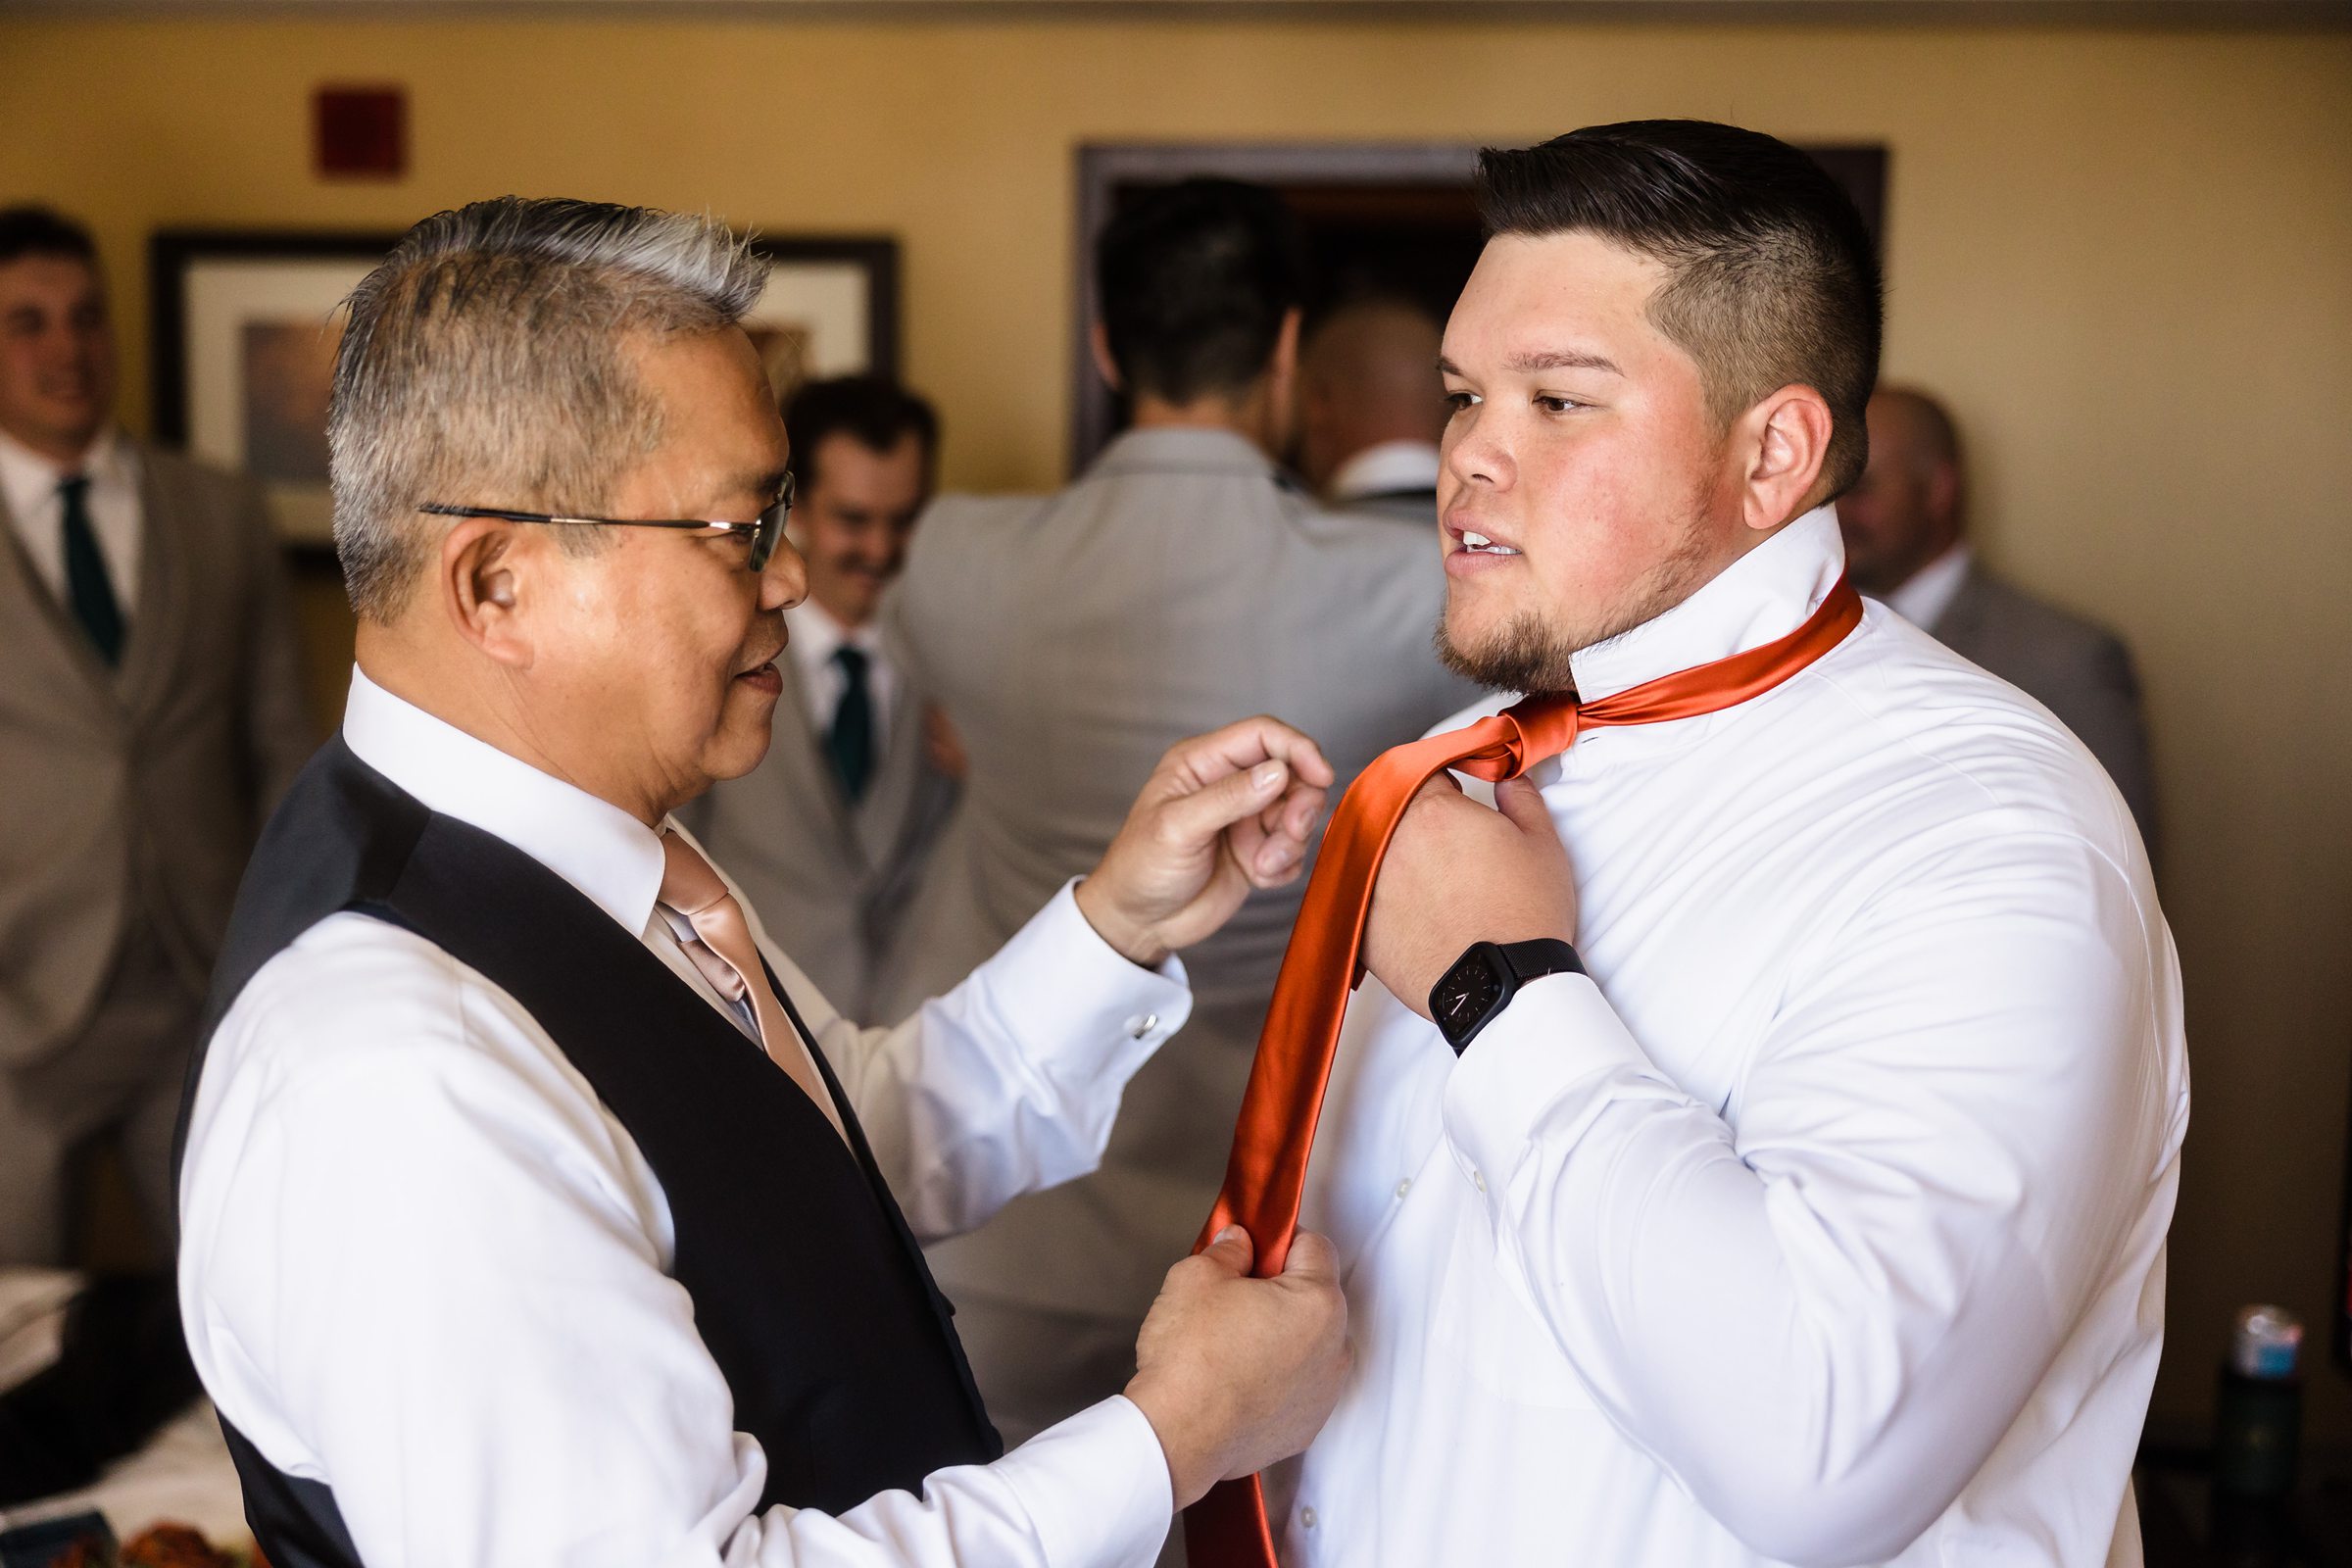 Father helps his son get ready before his wedding at the Destihl Brewery in Normal, Illinois.